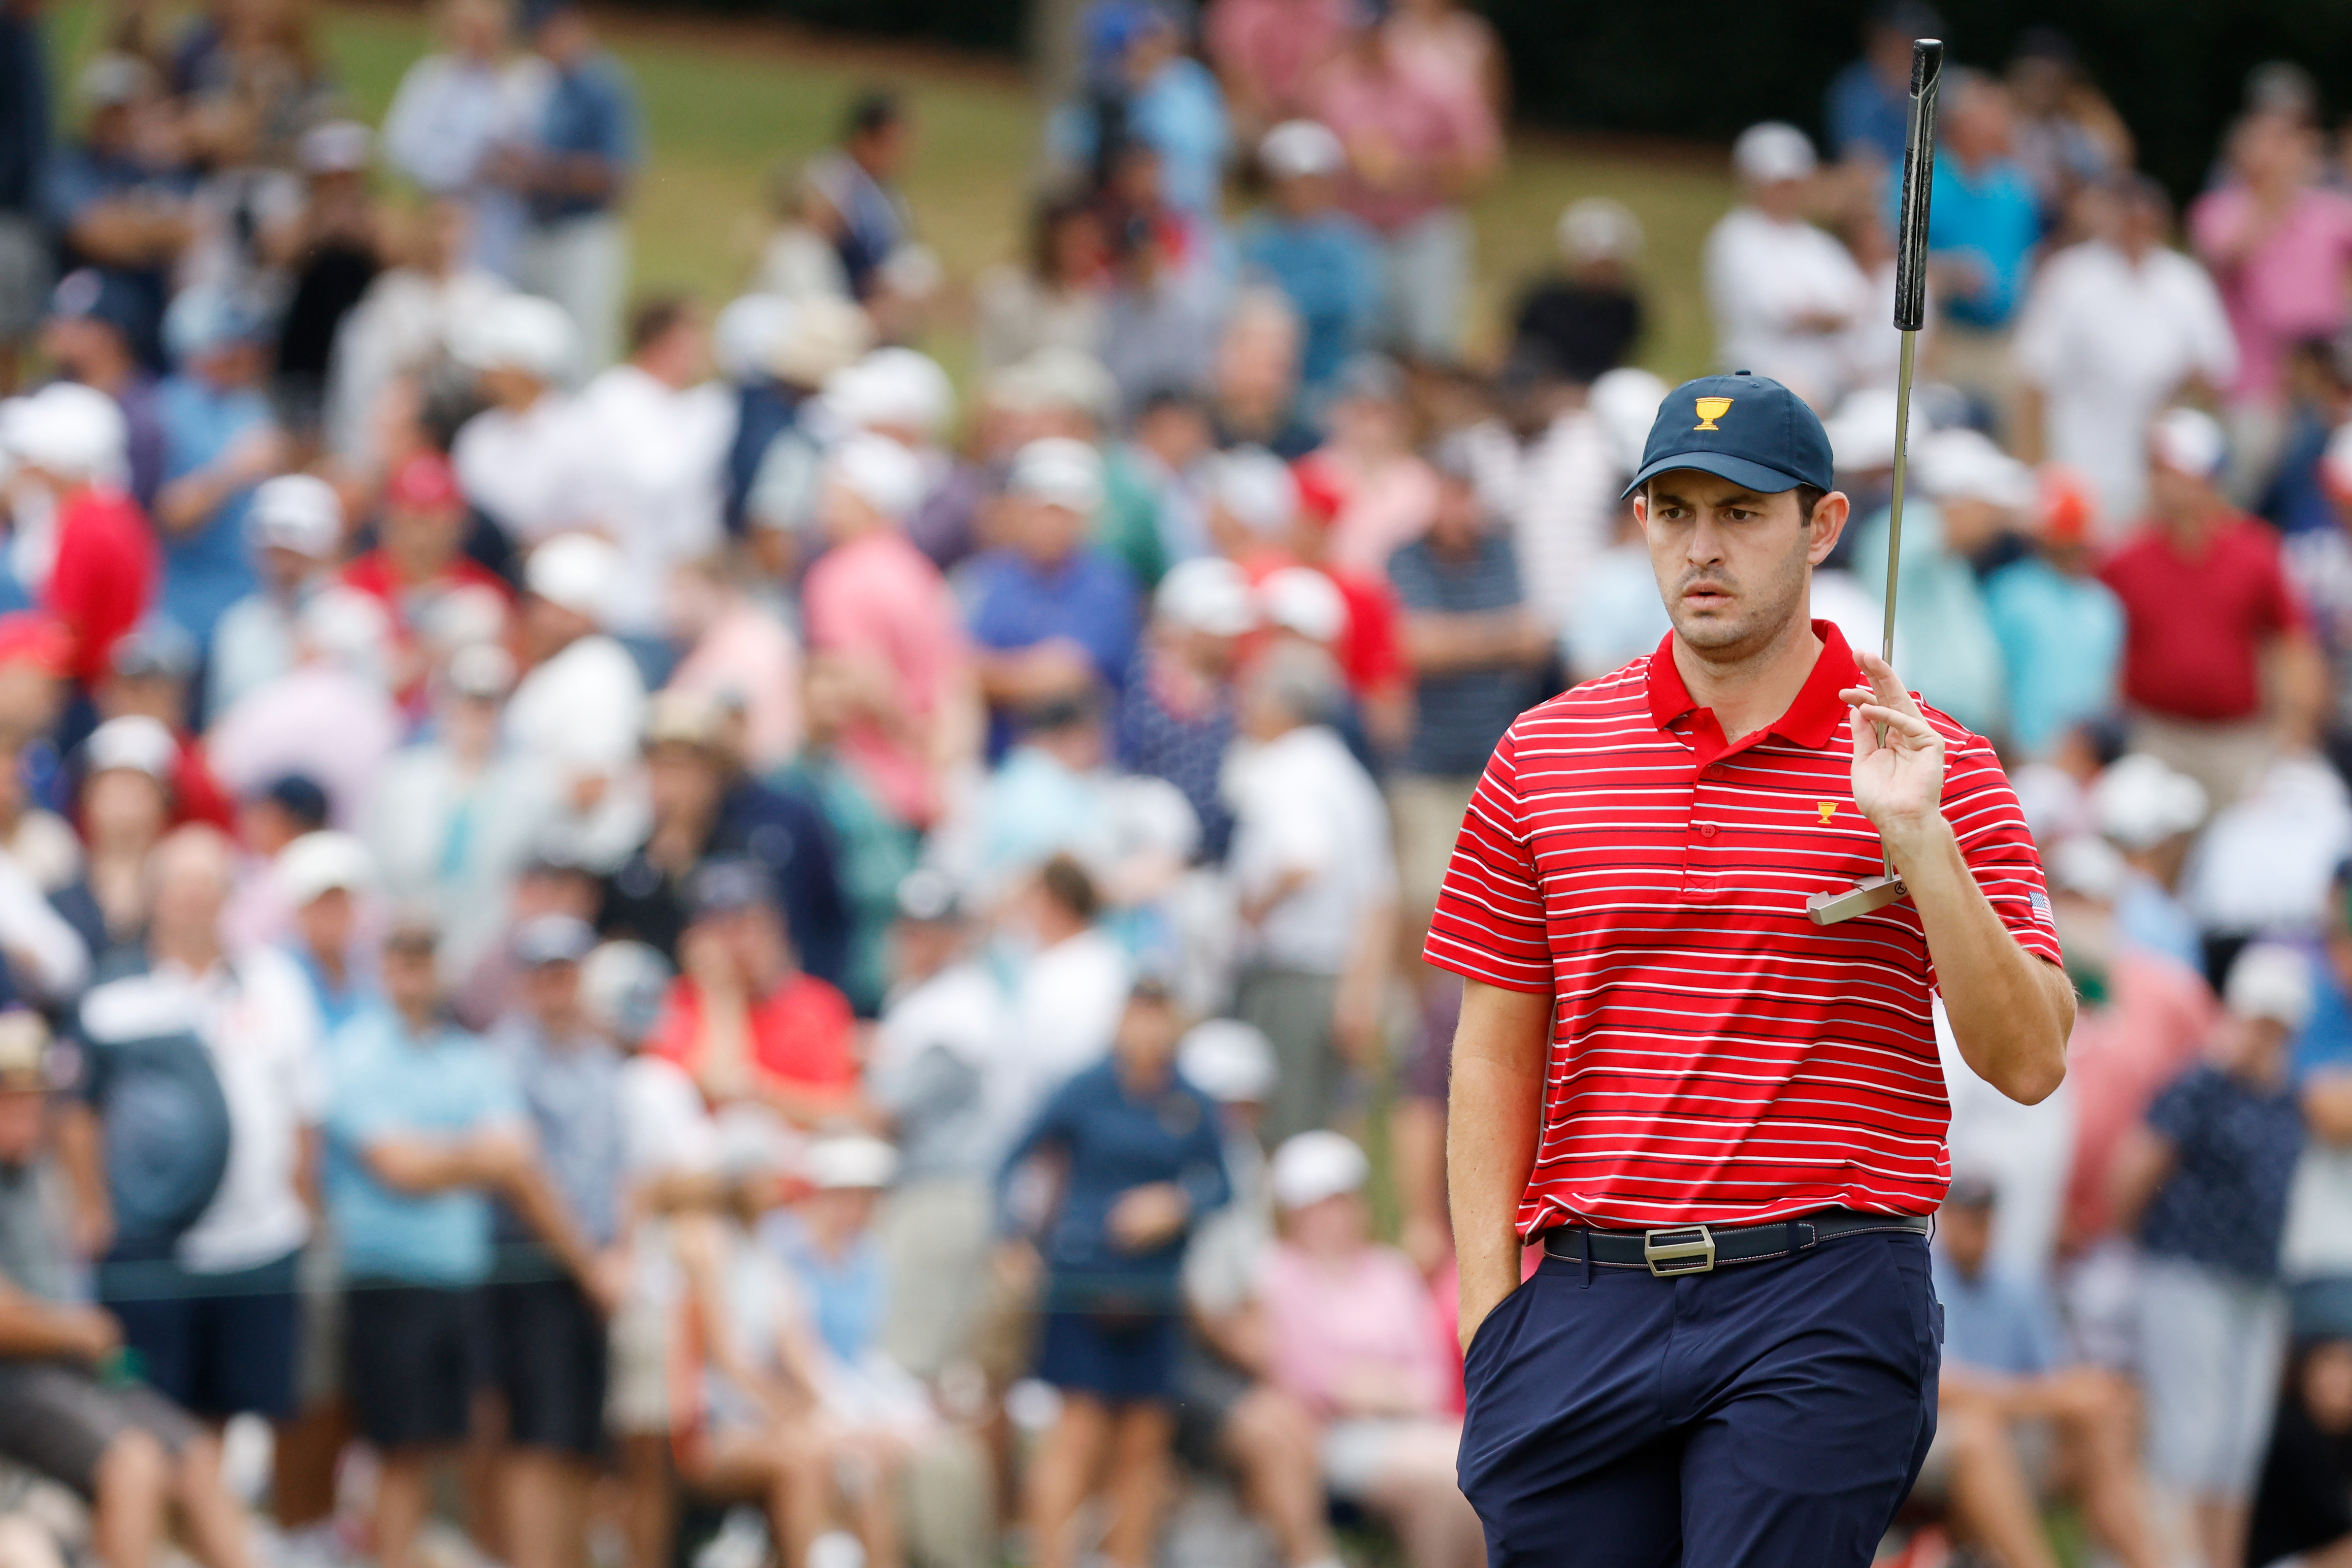 Patrick Cantlay of the United States Team reacts on the 15th green during Sunday singles matches on day four of the 2022 Presidents Cup at Quail Hollow Country Club on September 25, 2022 in Charlotte, North Carolina.